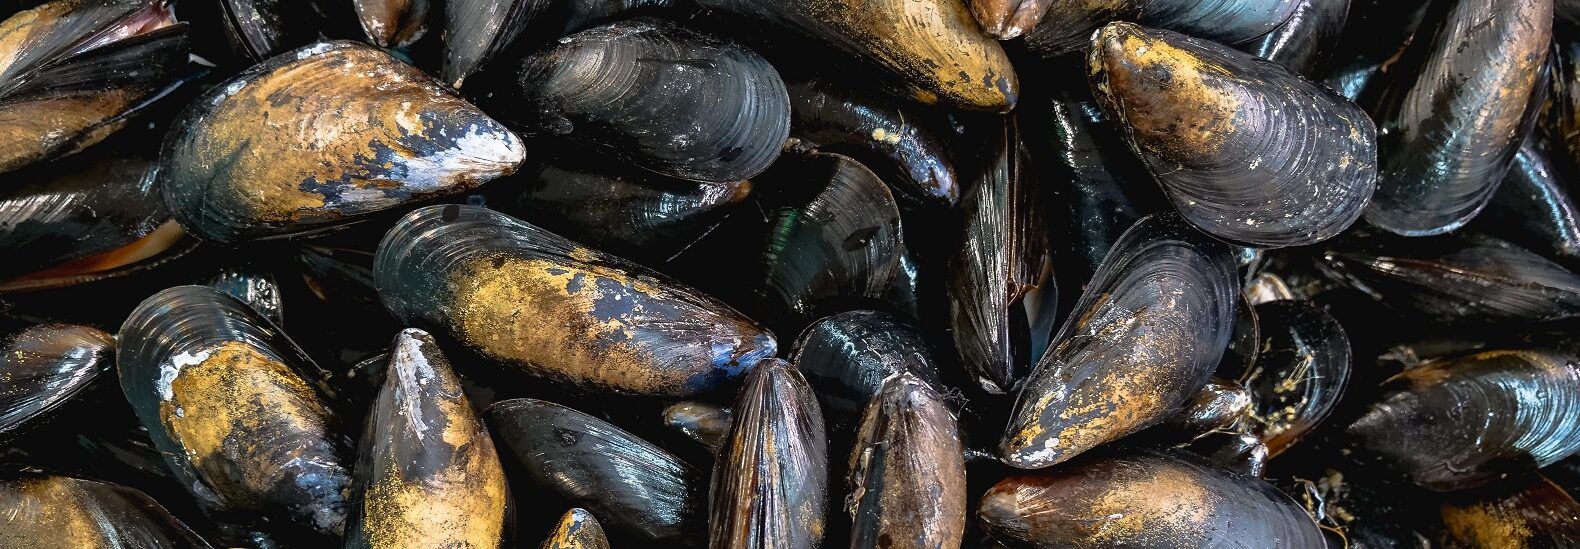 🌊 Endangered mussels reproduce for the first time in decades